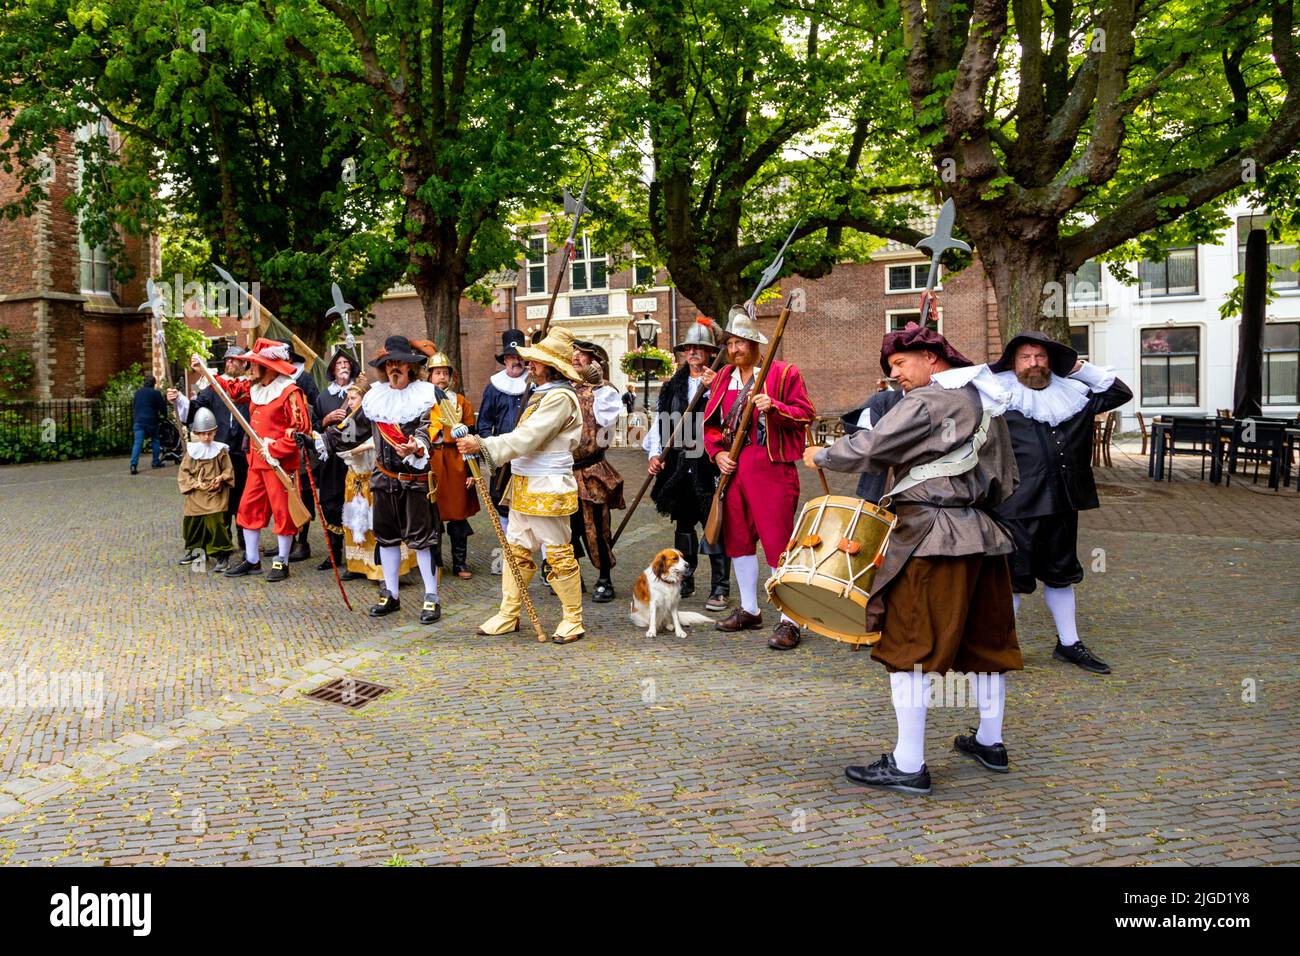 Reenactment festival of Rembrandt van Rijn- actors portraying the company of the famous Night Watch painting, Leiden, South Holland, Netherlands. Stock Photo